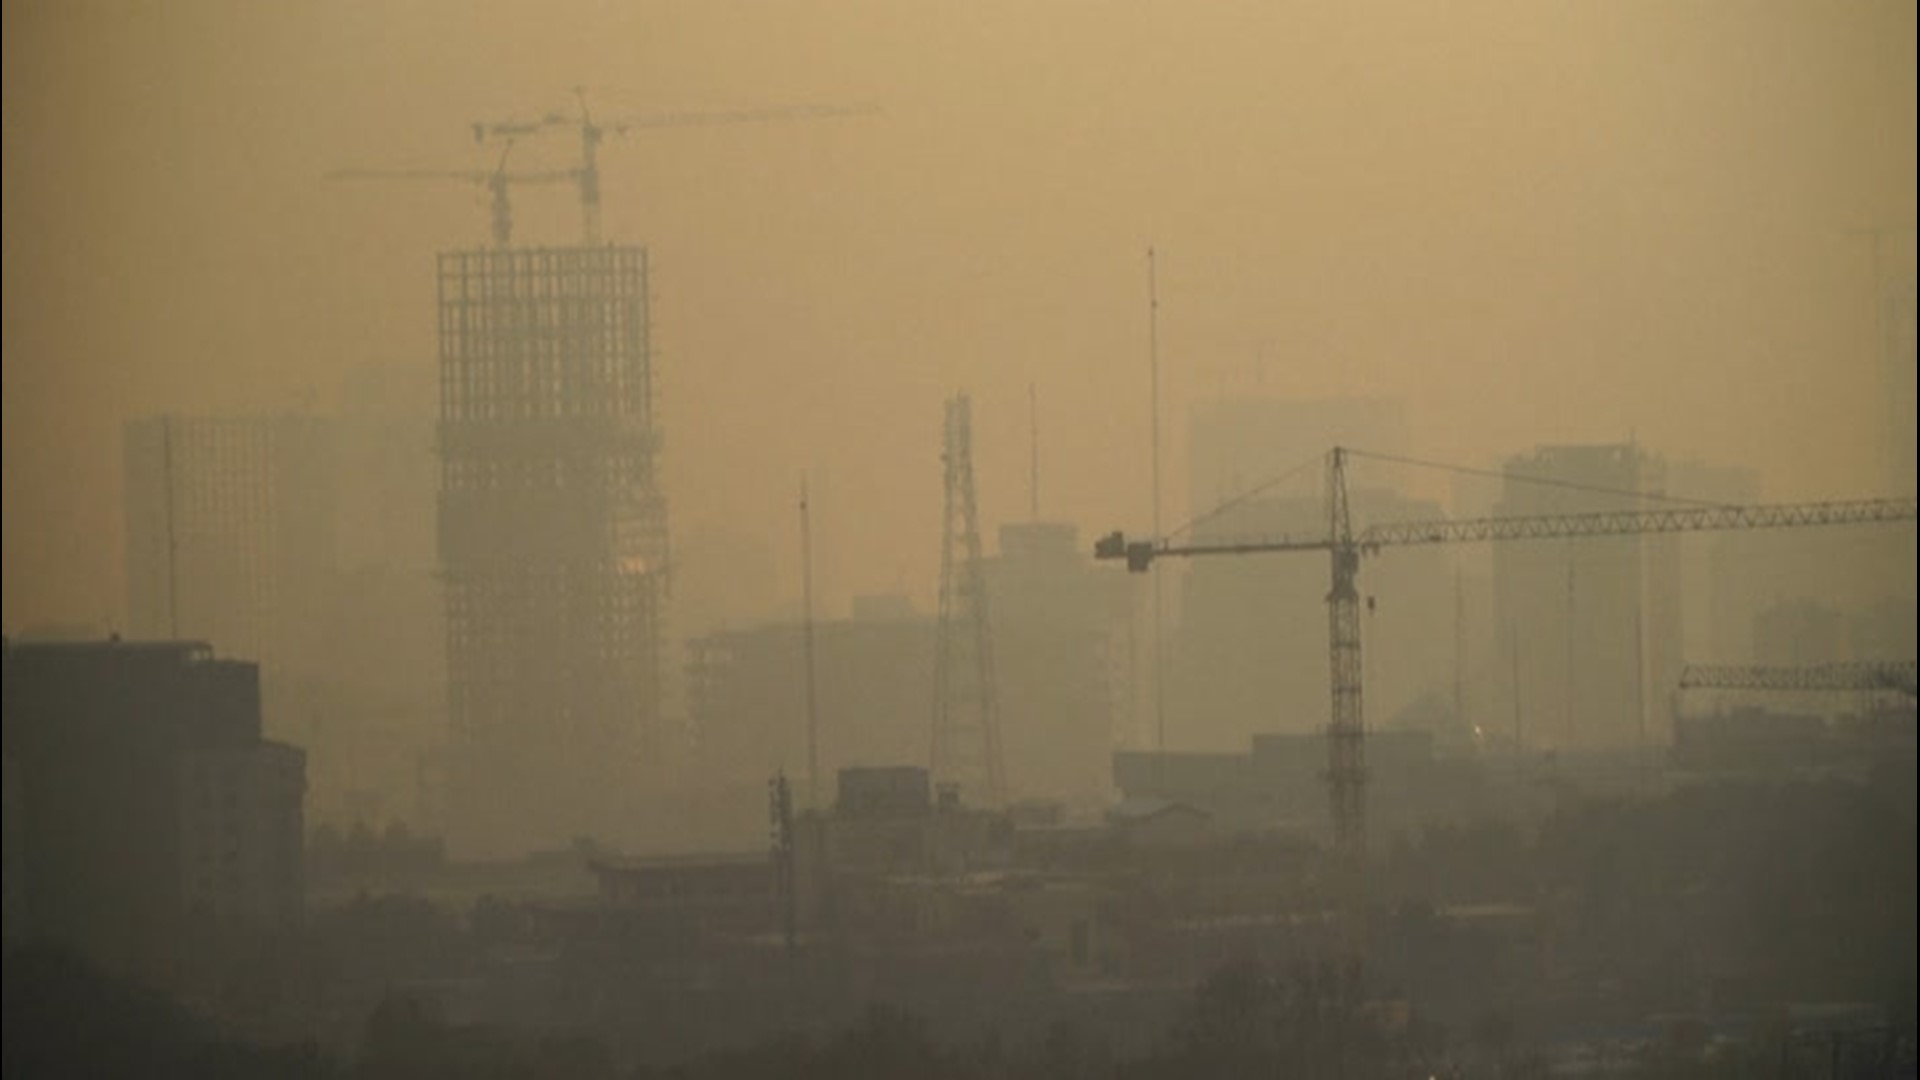 The Iranian capital of Tehran suffocated under a blanket of smog on Jan. 13.